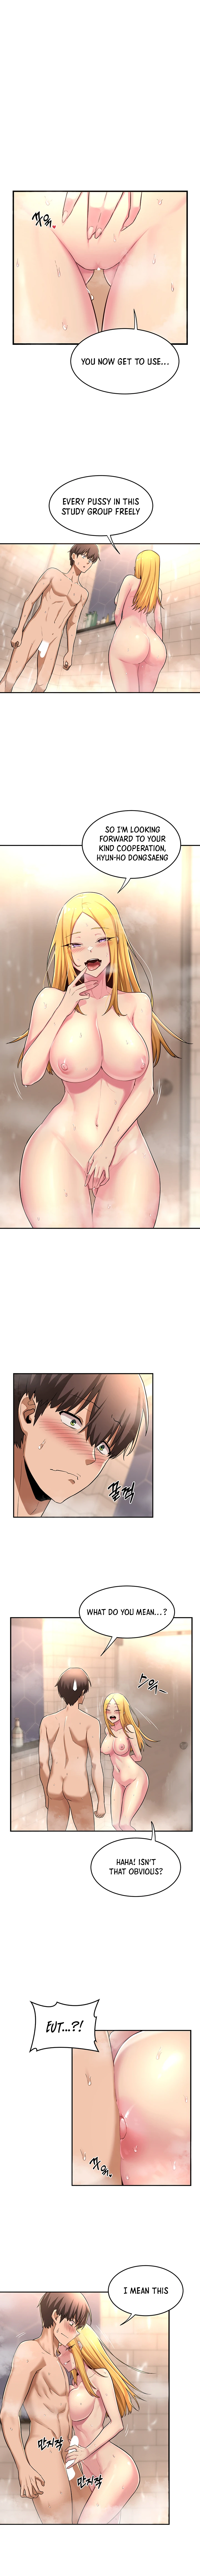 Panel Image 1 for chapter 7 of manhwa Sex Study Group on read.oppai.stream